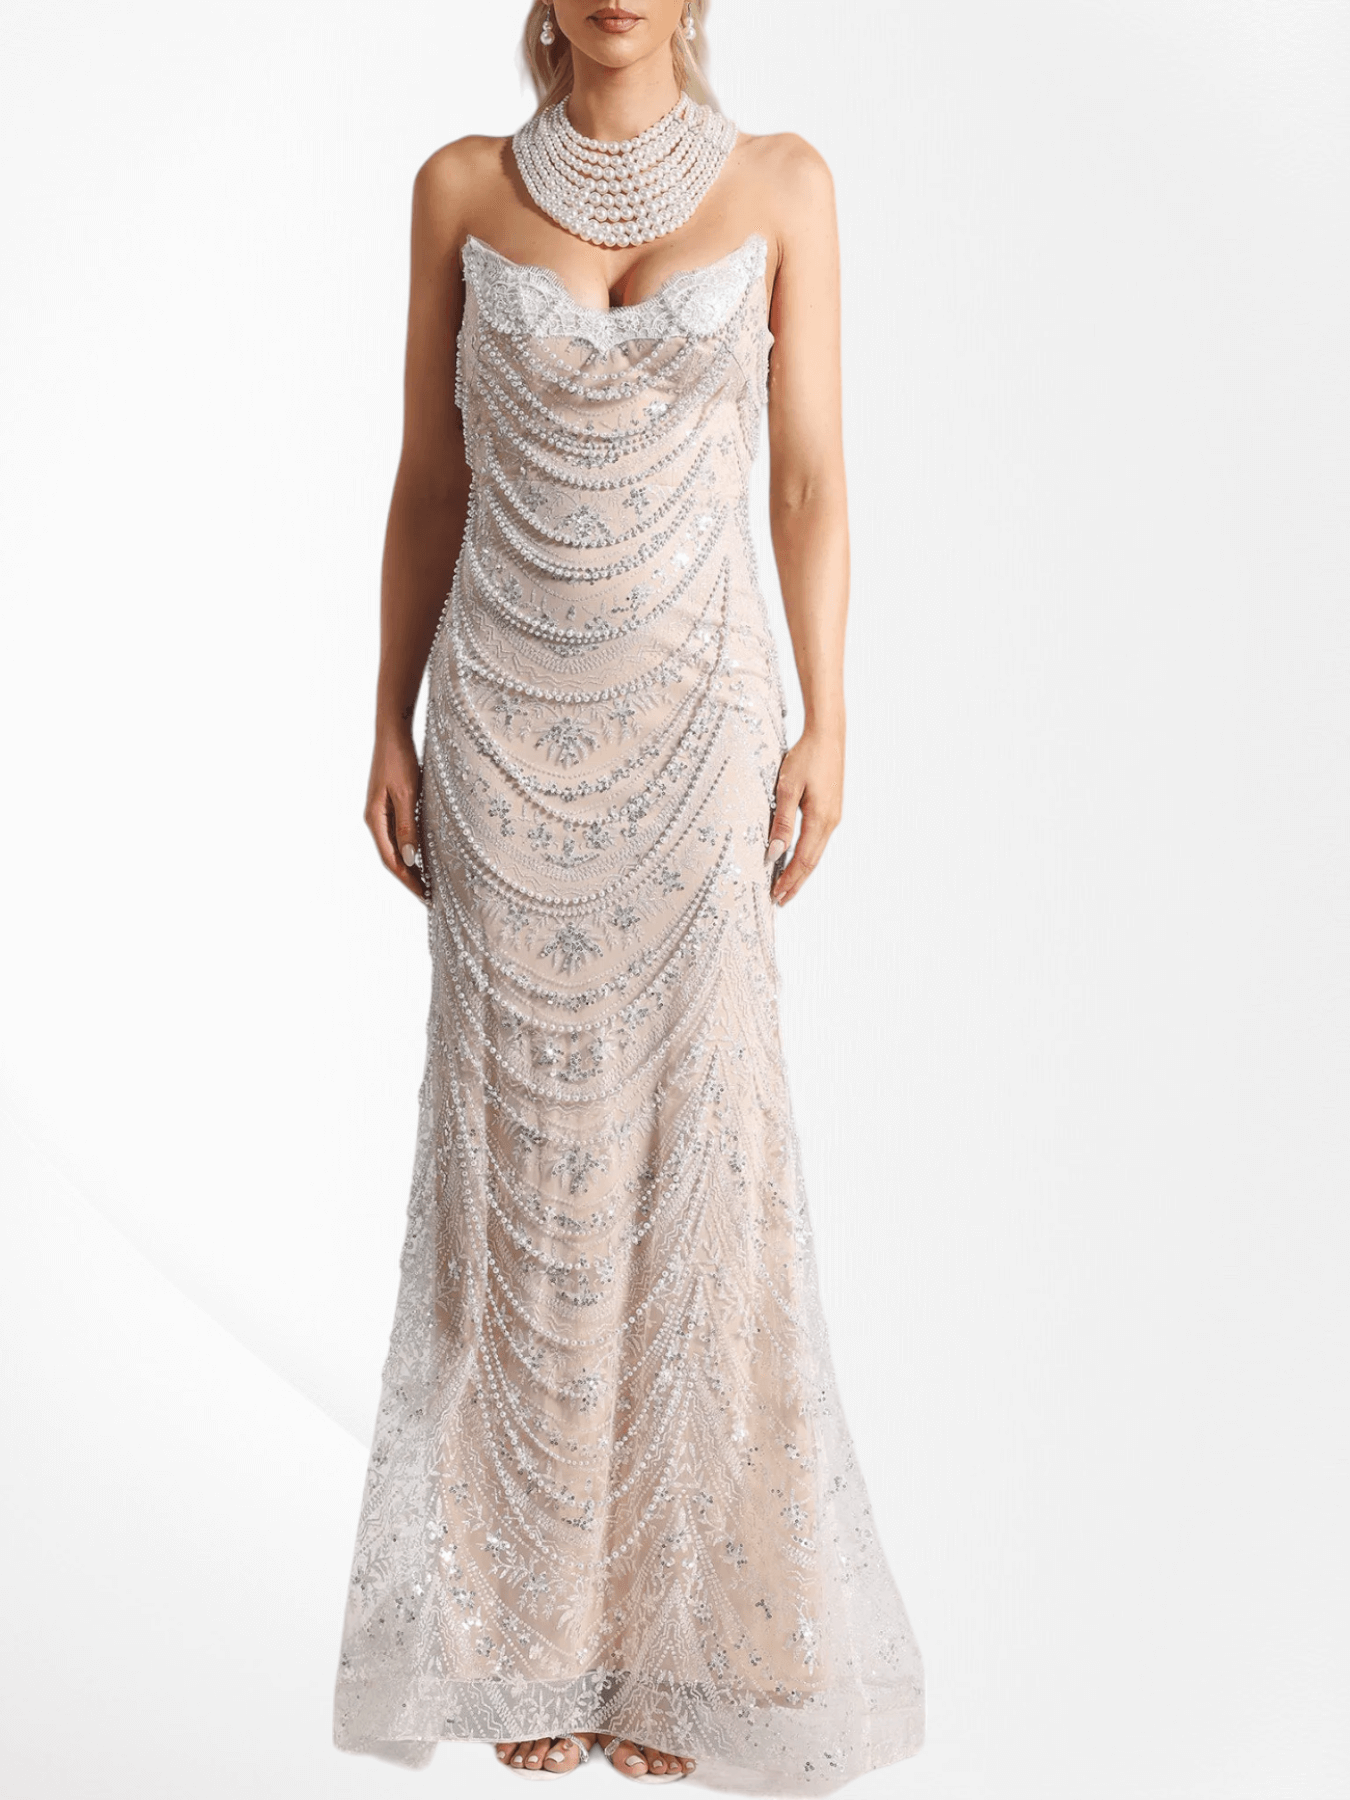 Pearl Chain Eelgant Mermaid Gown With Gloves